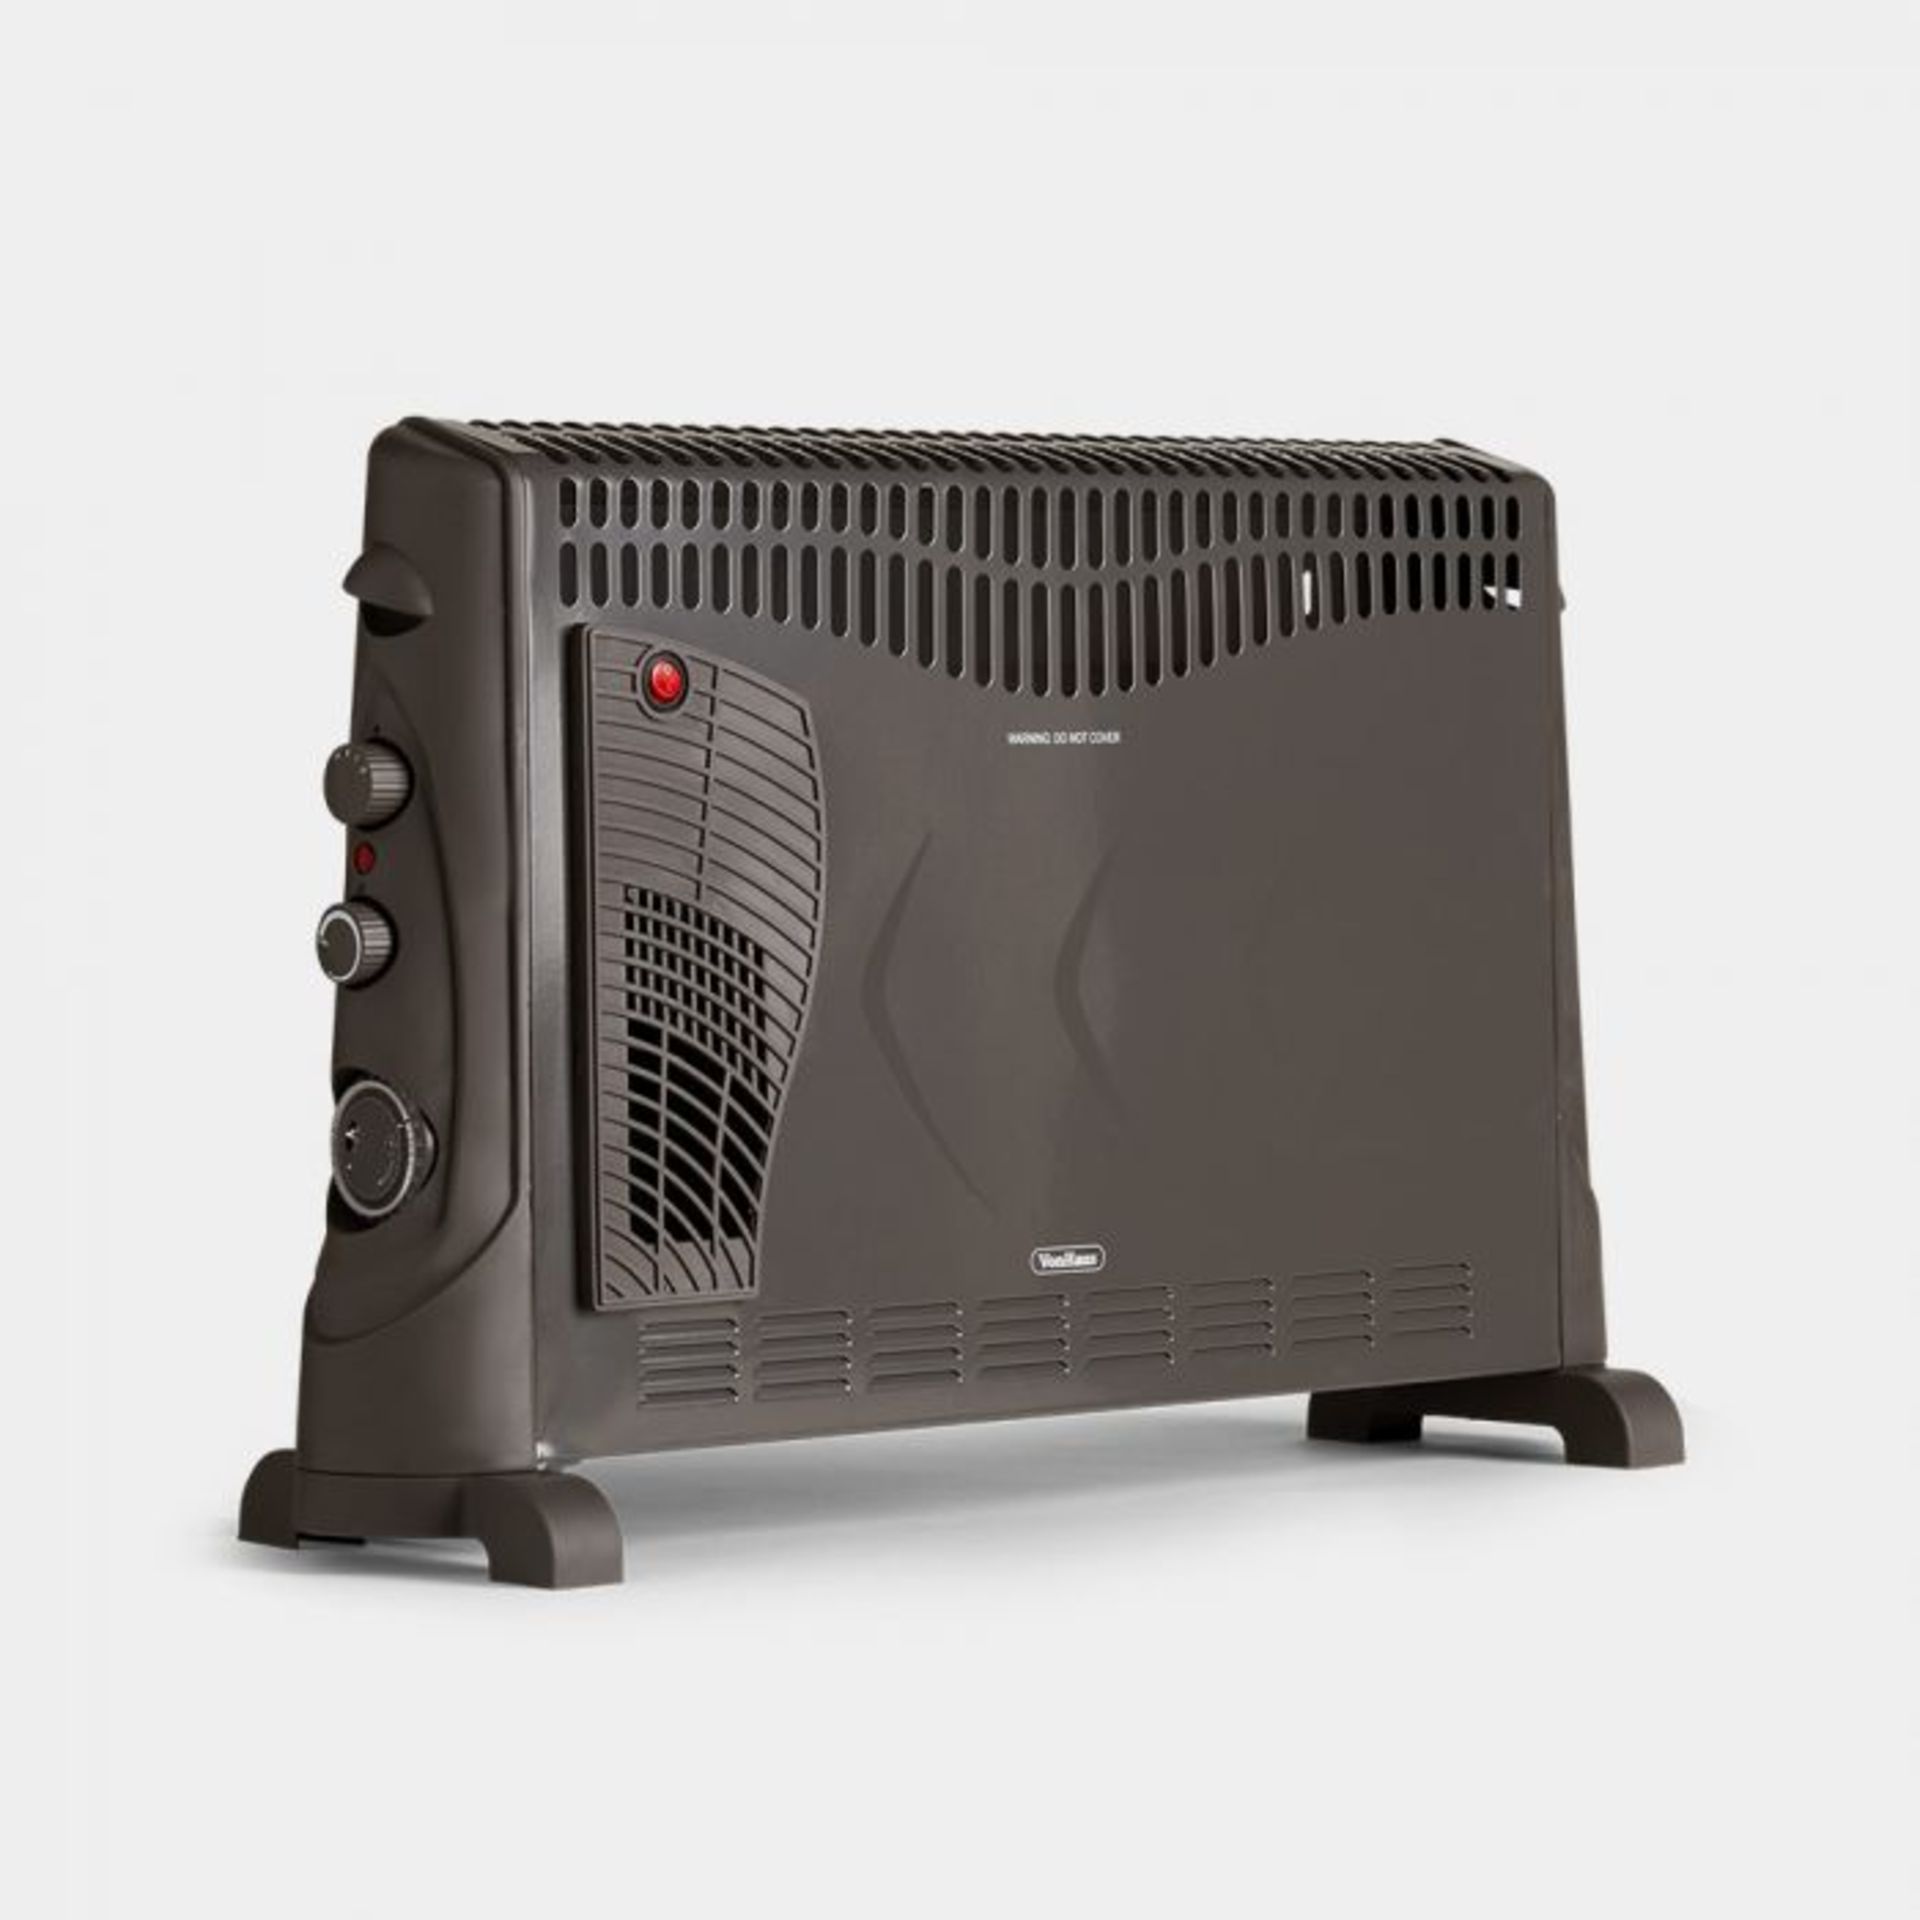 (S37) 000W Convector Heater with Turbo 3 heat settings – 750W, 1250W & 2000W – plus adjust... - Image 2 of 3